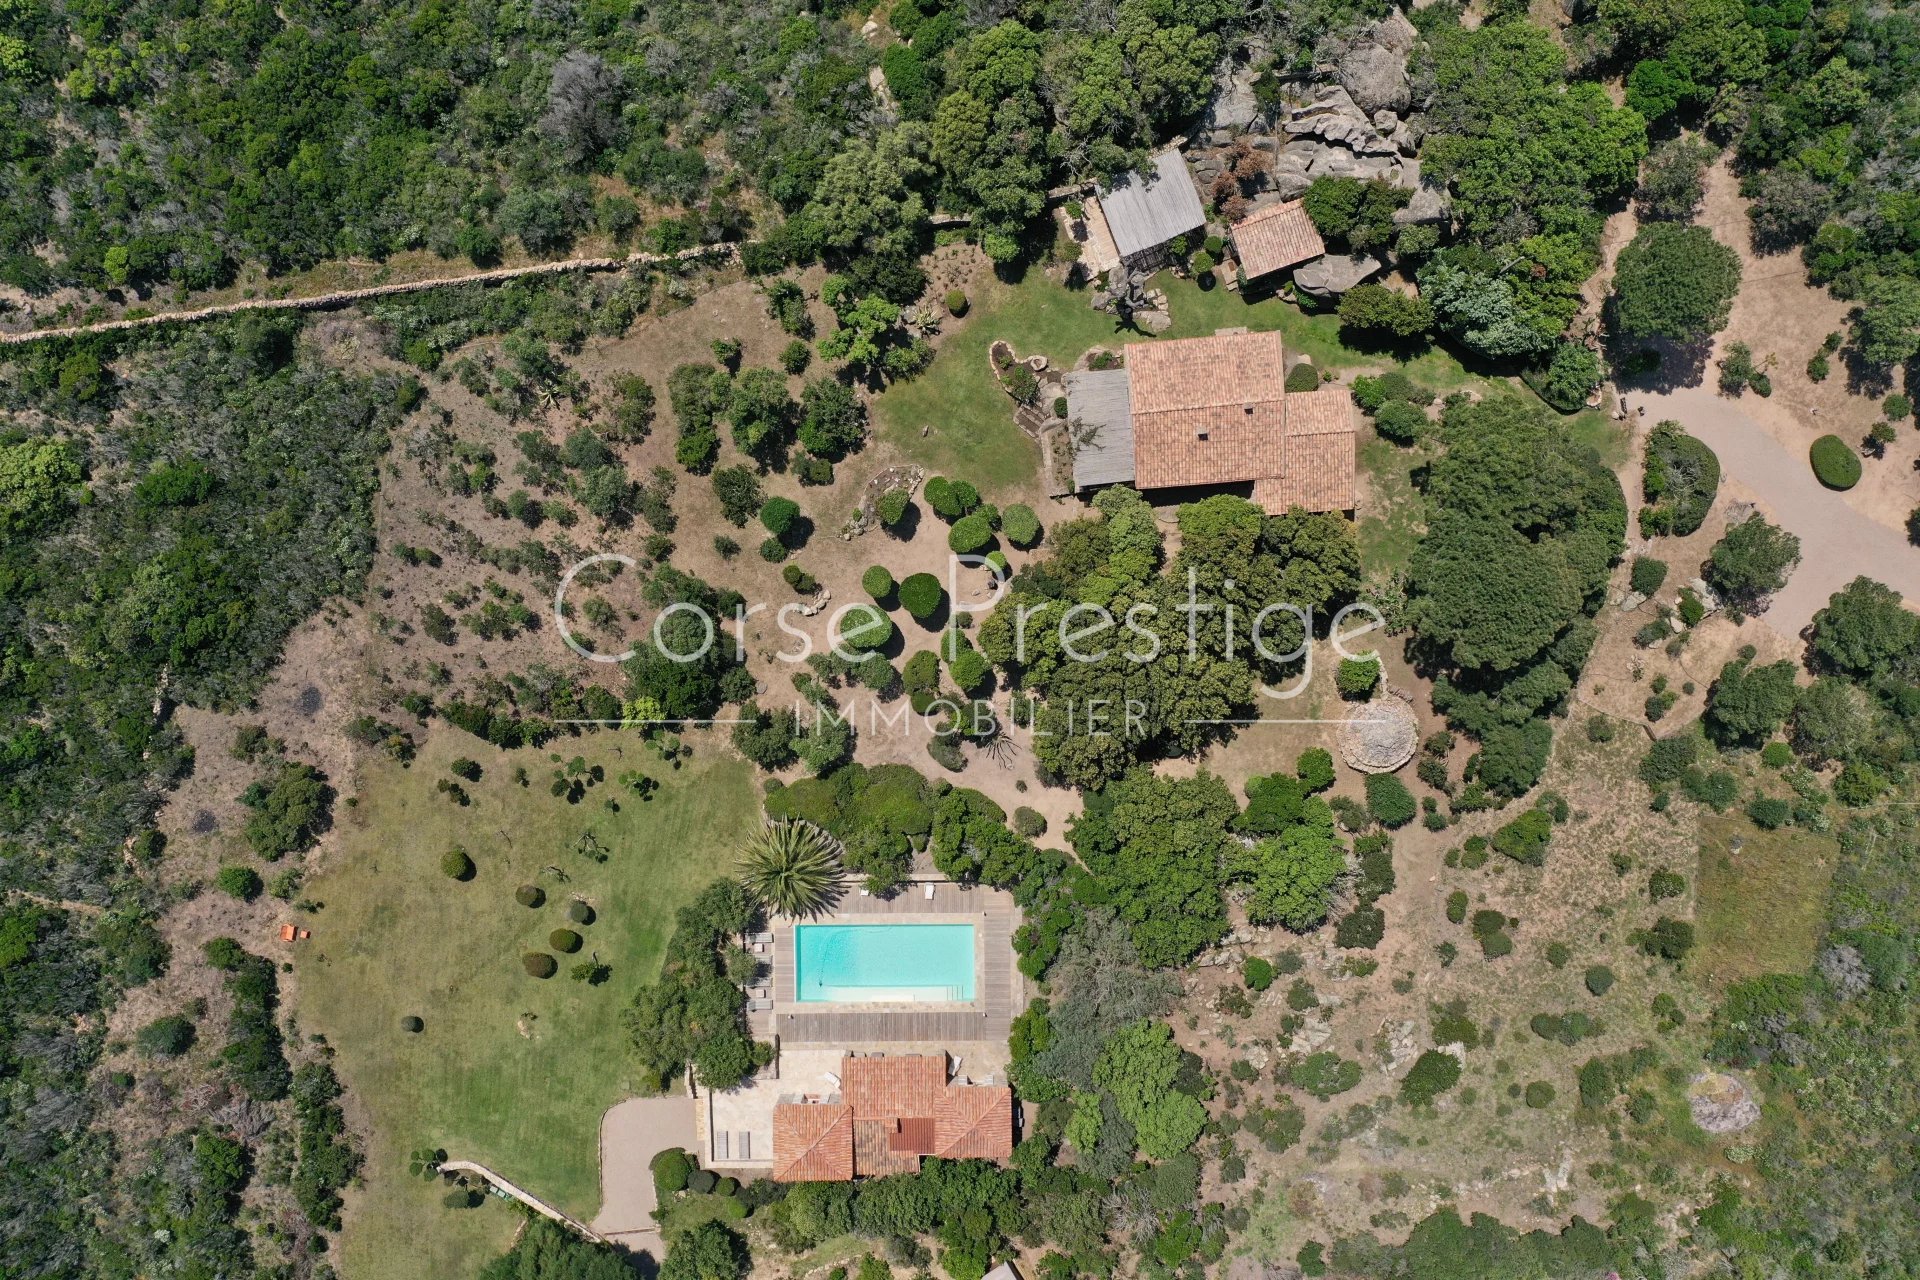 sheepfold to rent in bonifacio - away from prying eyes - south corsica image2